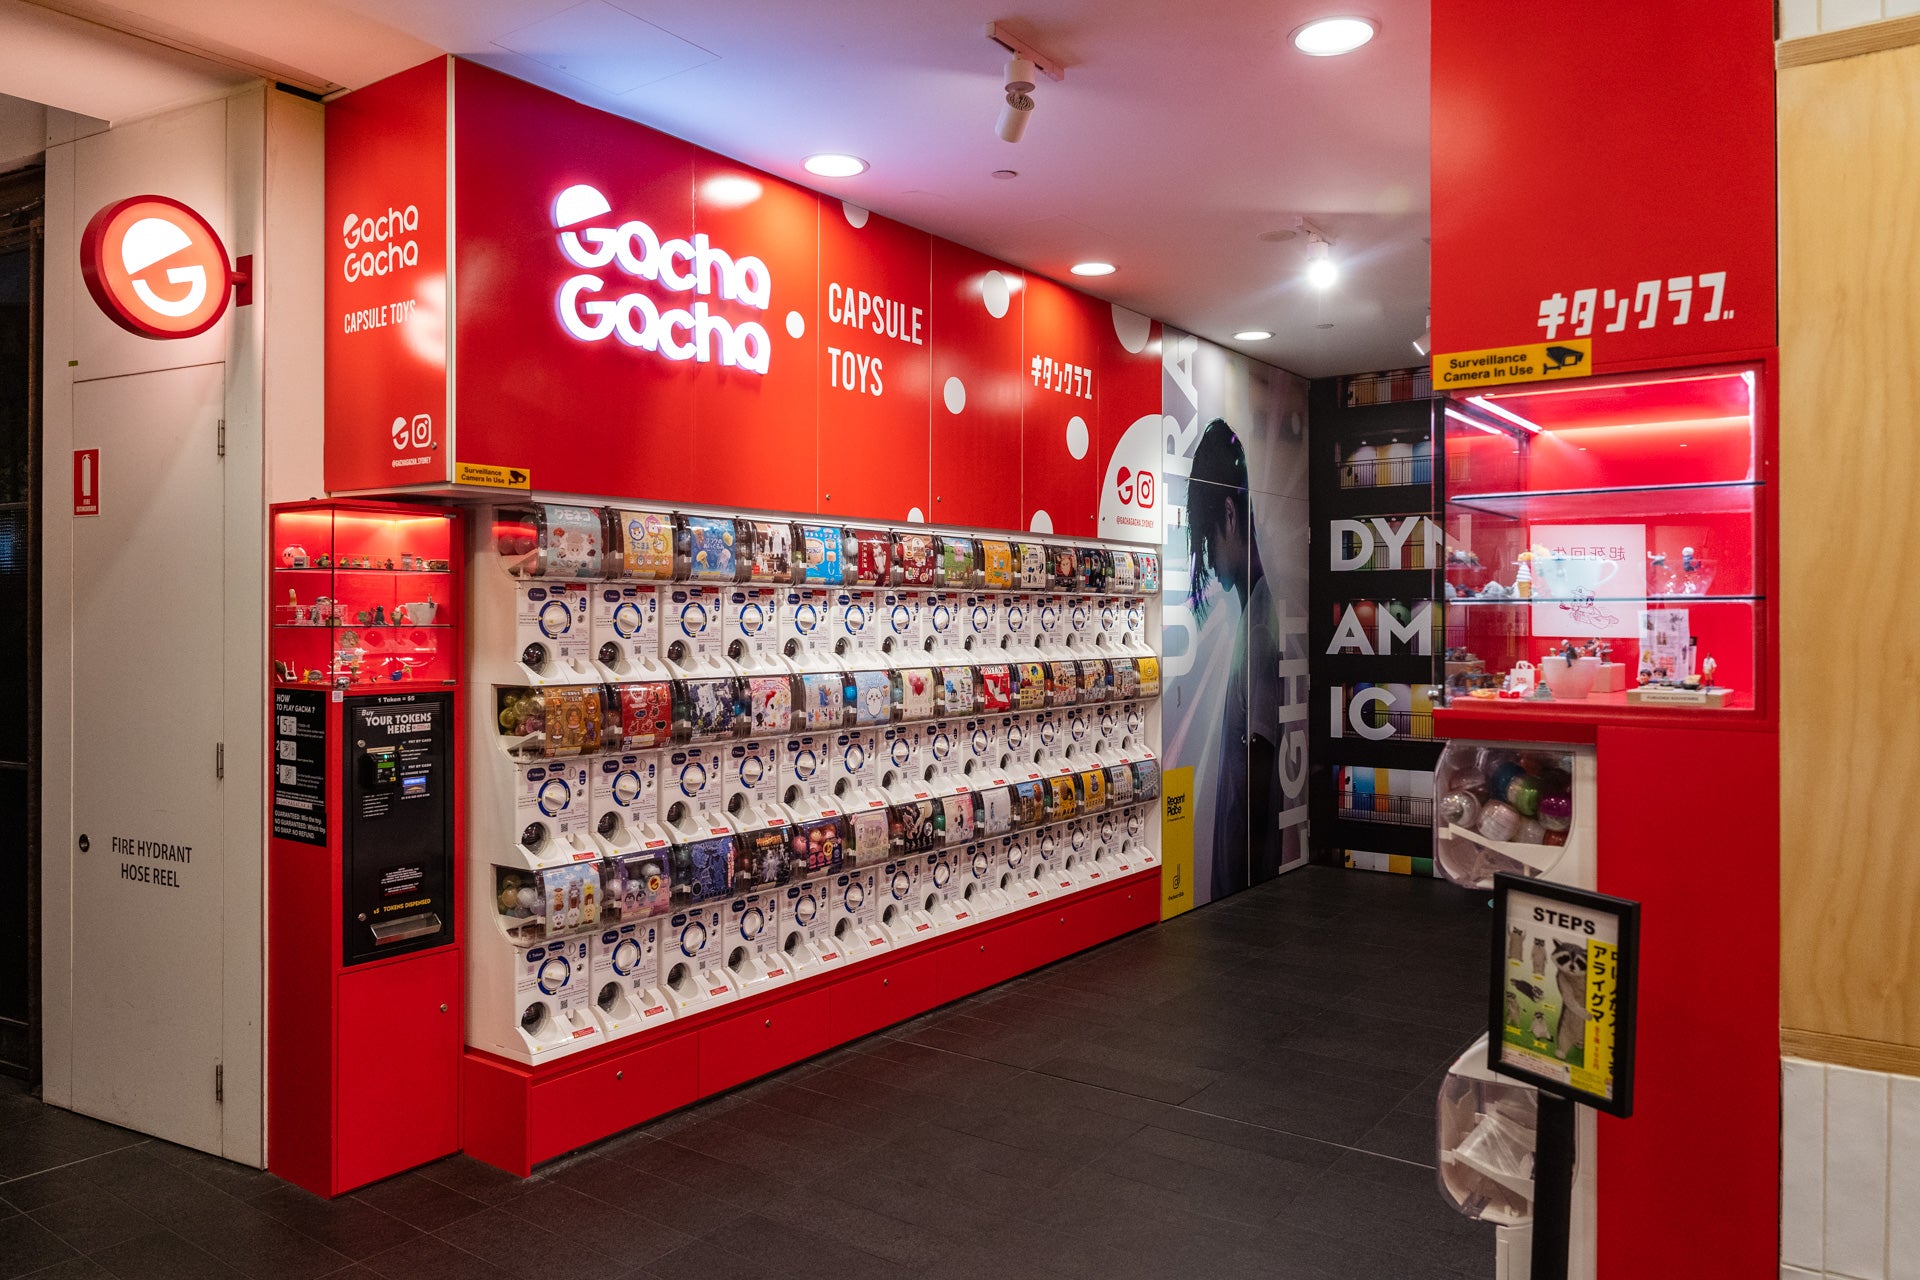 The 4th GACHA-GACHA Boom is Happening Now! Adults Take Center Stage at a  Capsule Toy Specialty Stand in Shinbashi Station